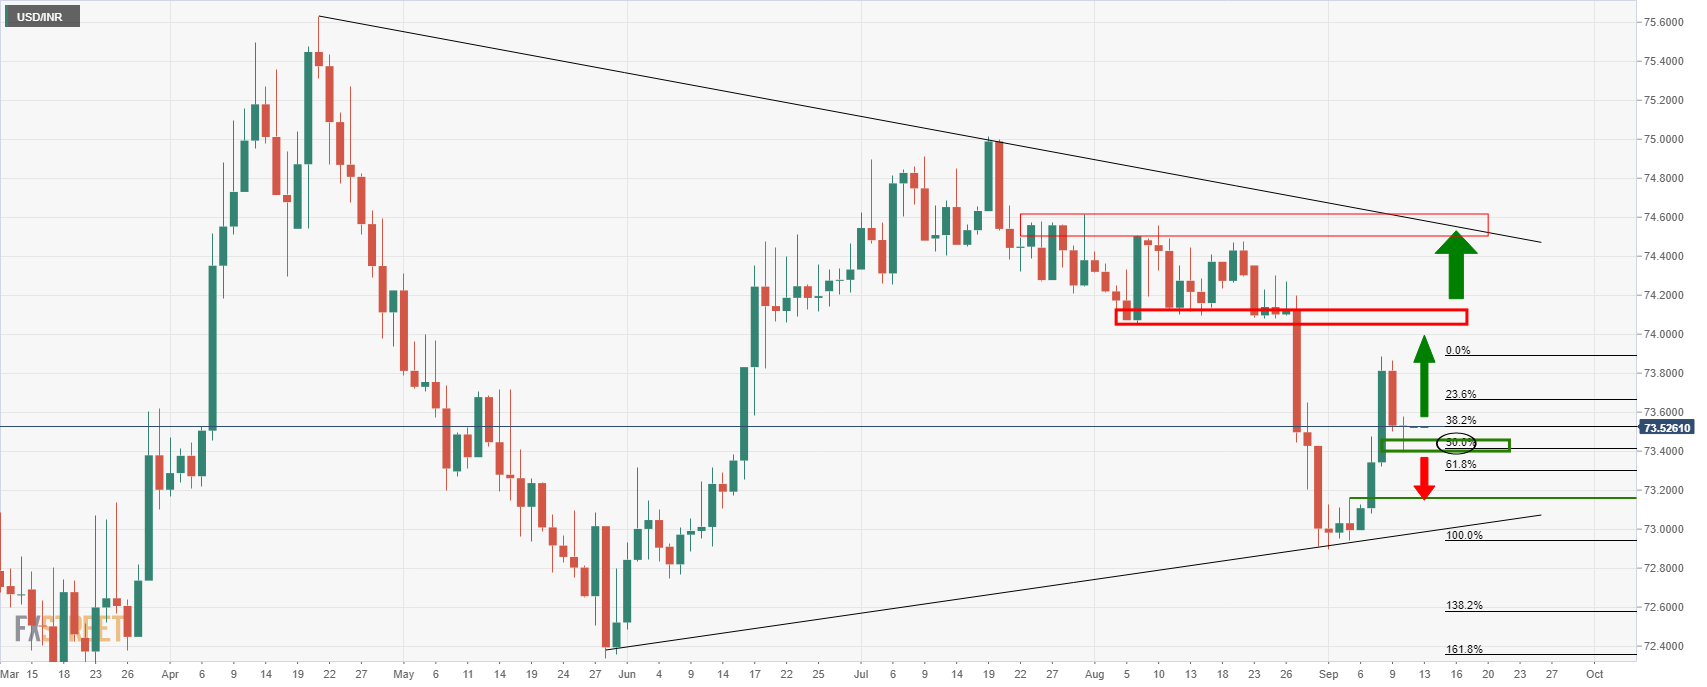 USD/INR Price News: Indian rupee holds firm at 50% mean reversion